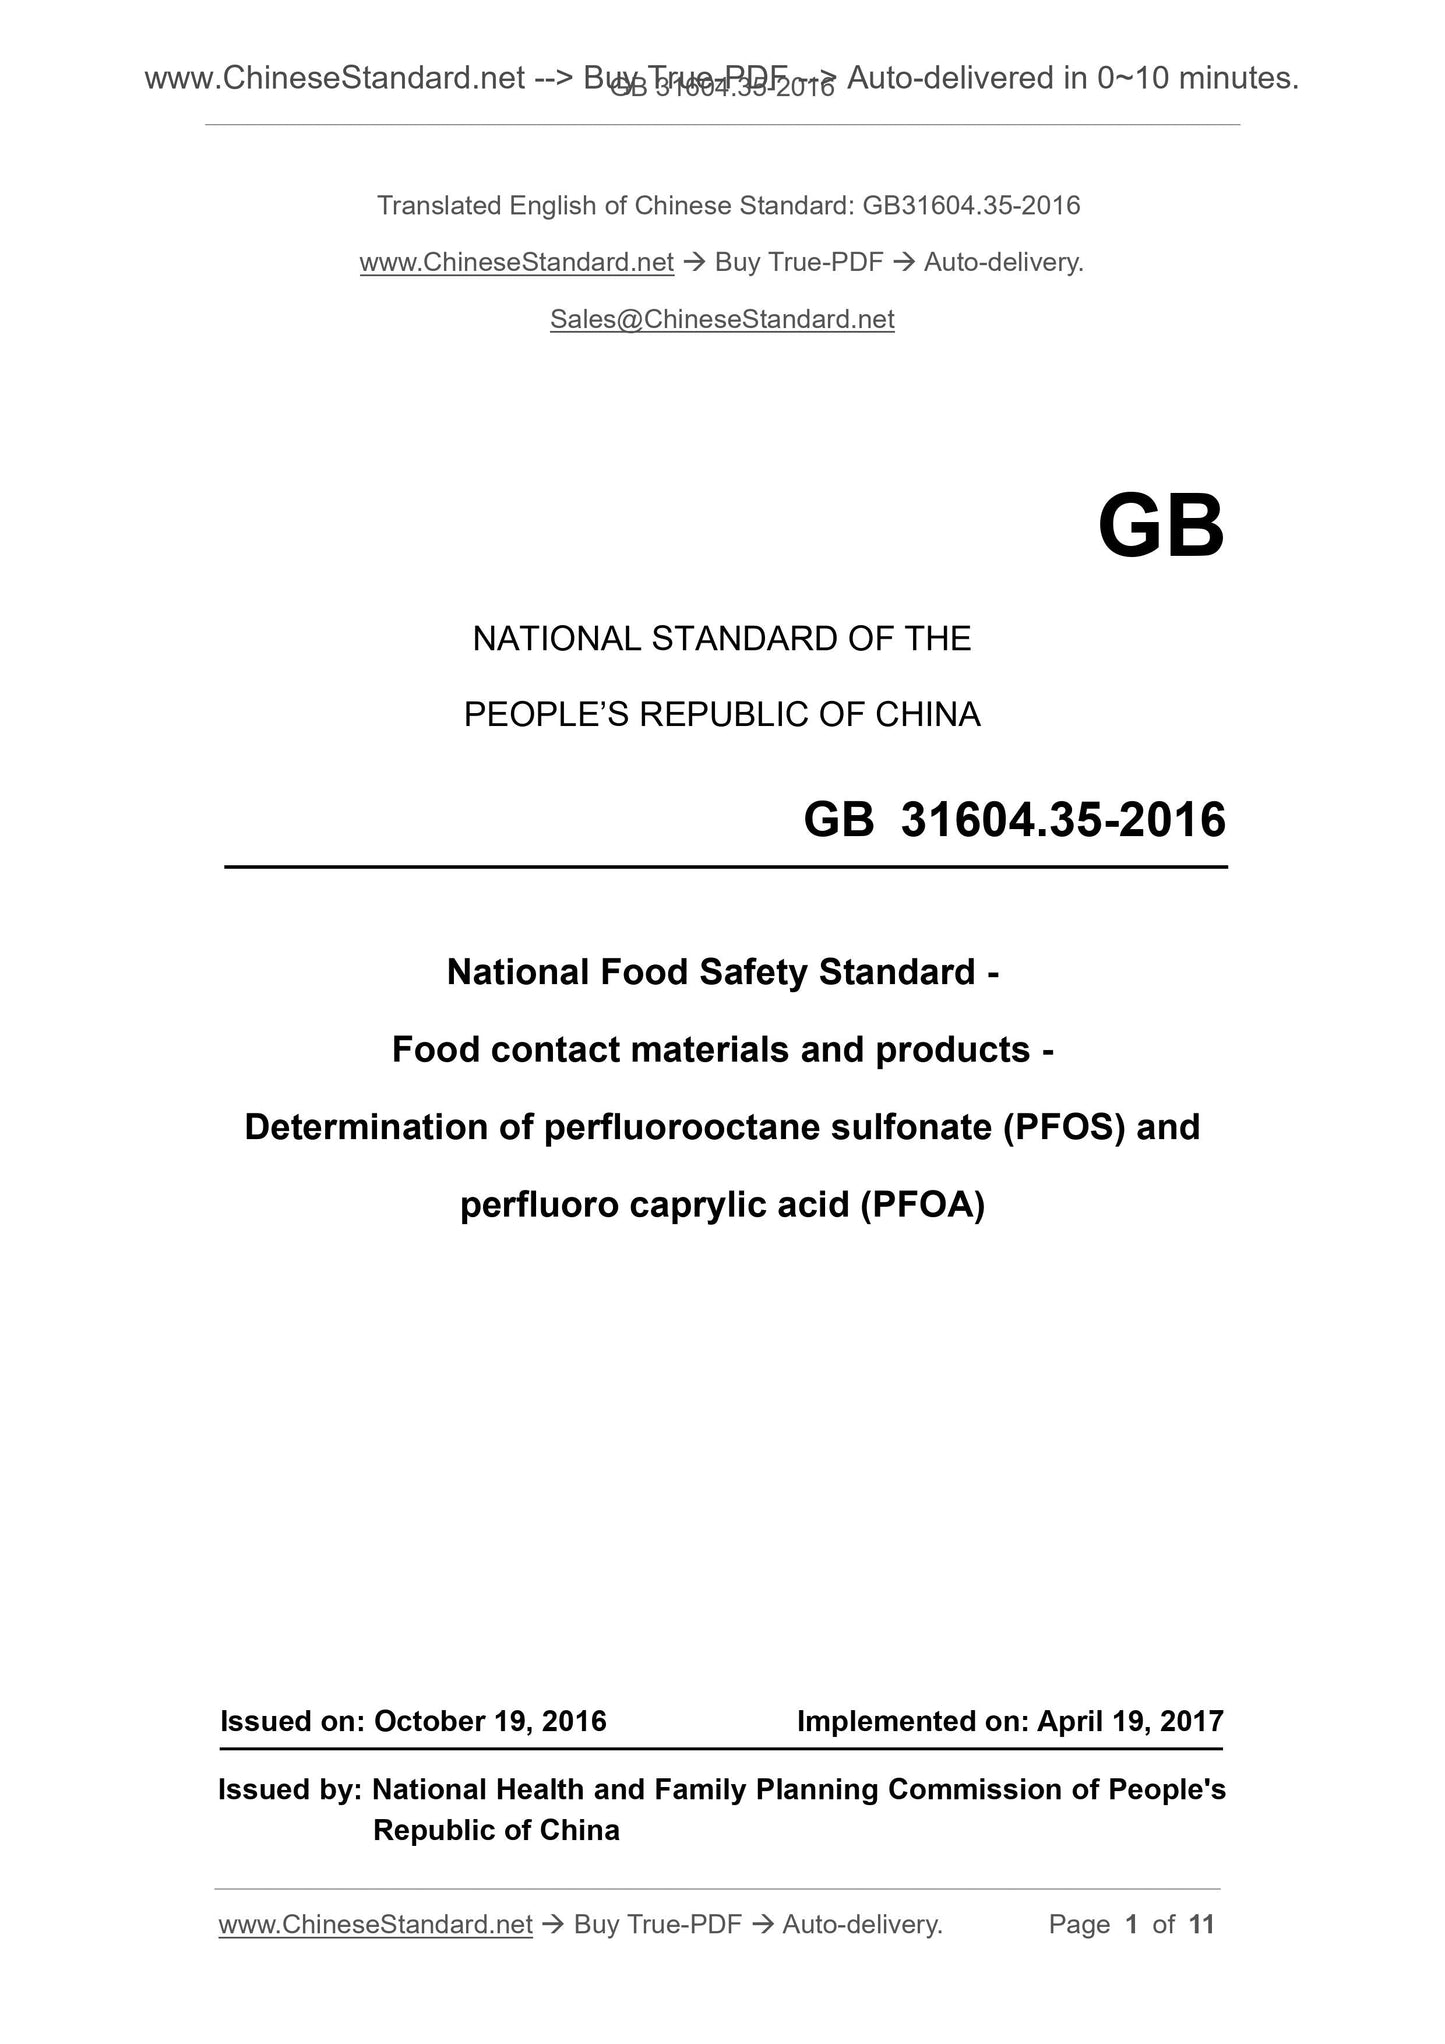 GB 31604.35-2016 Page 1